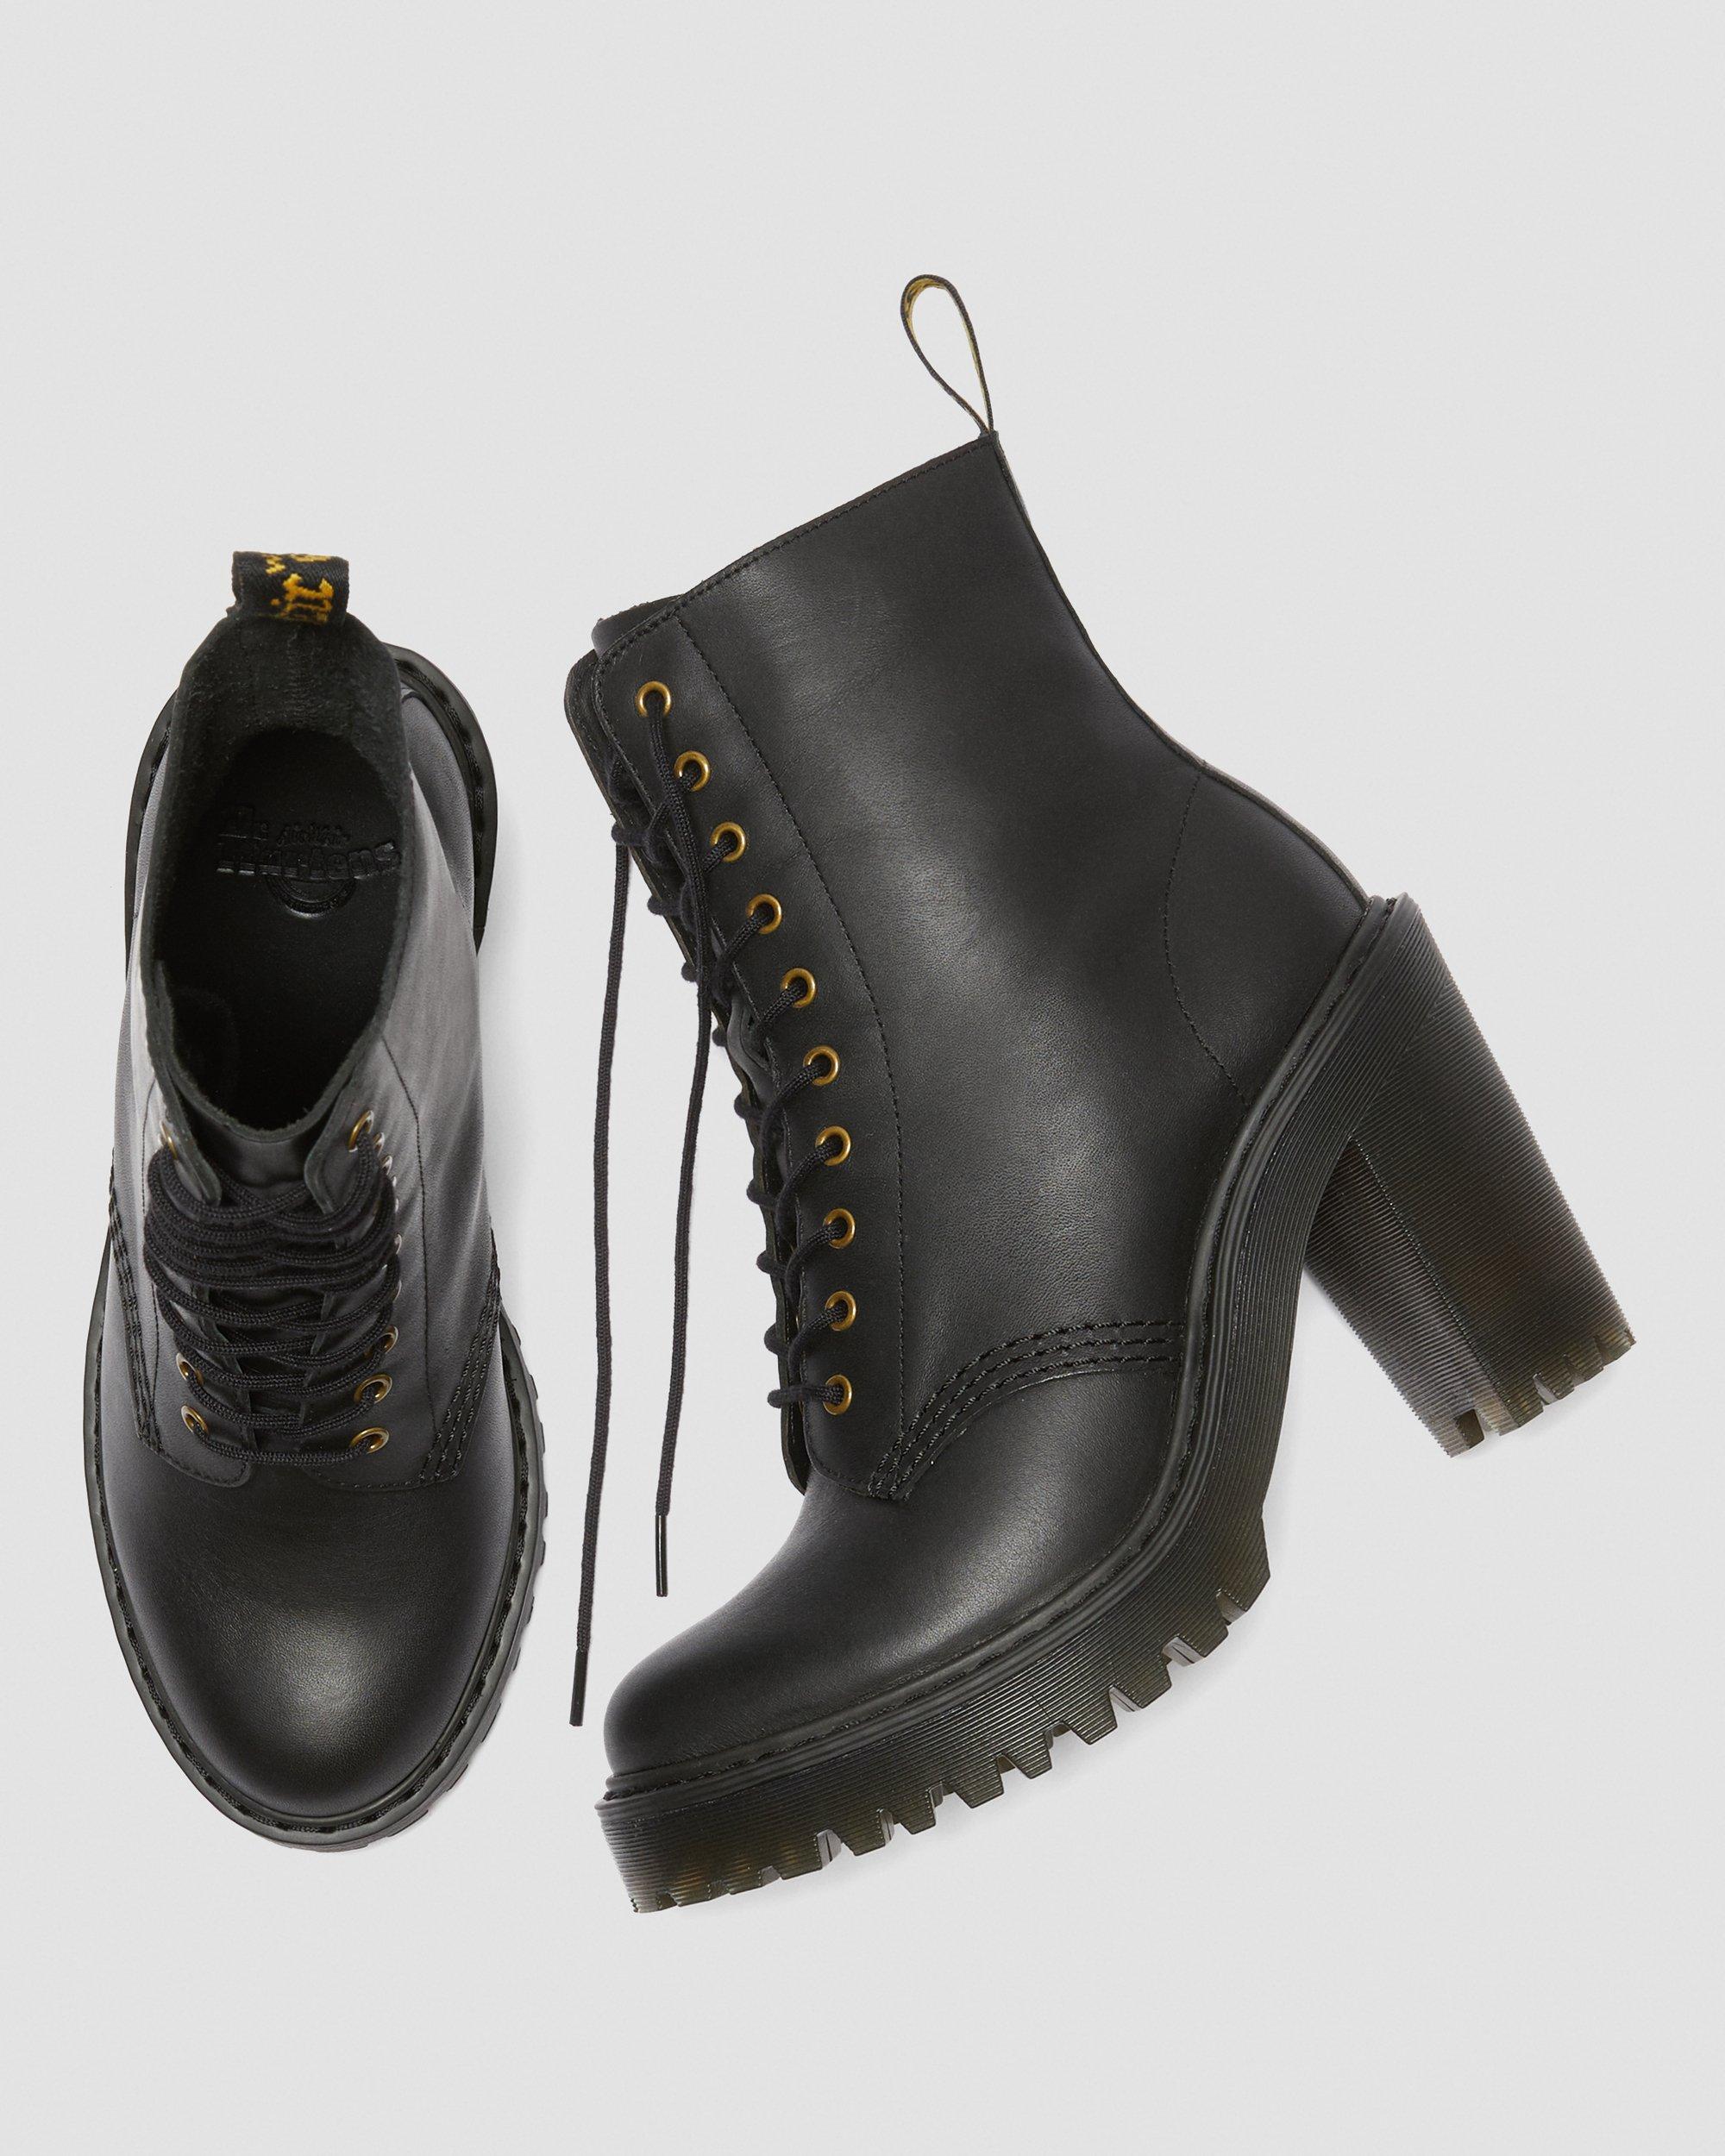 DR MARTENS Kendra Women's Leather Heeled Boots